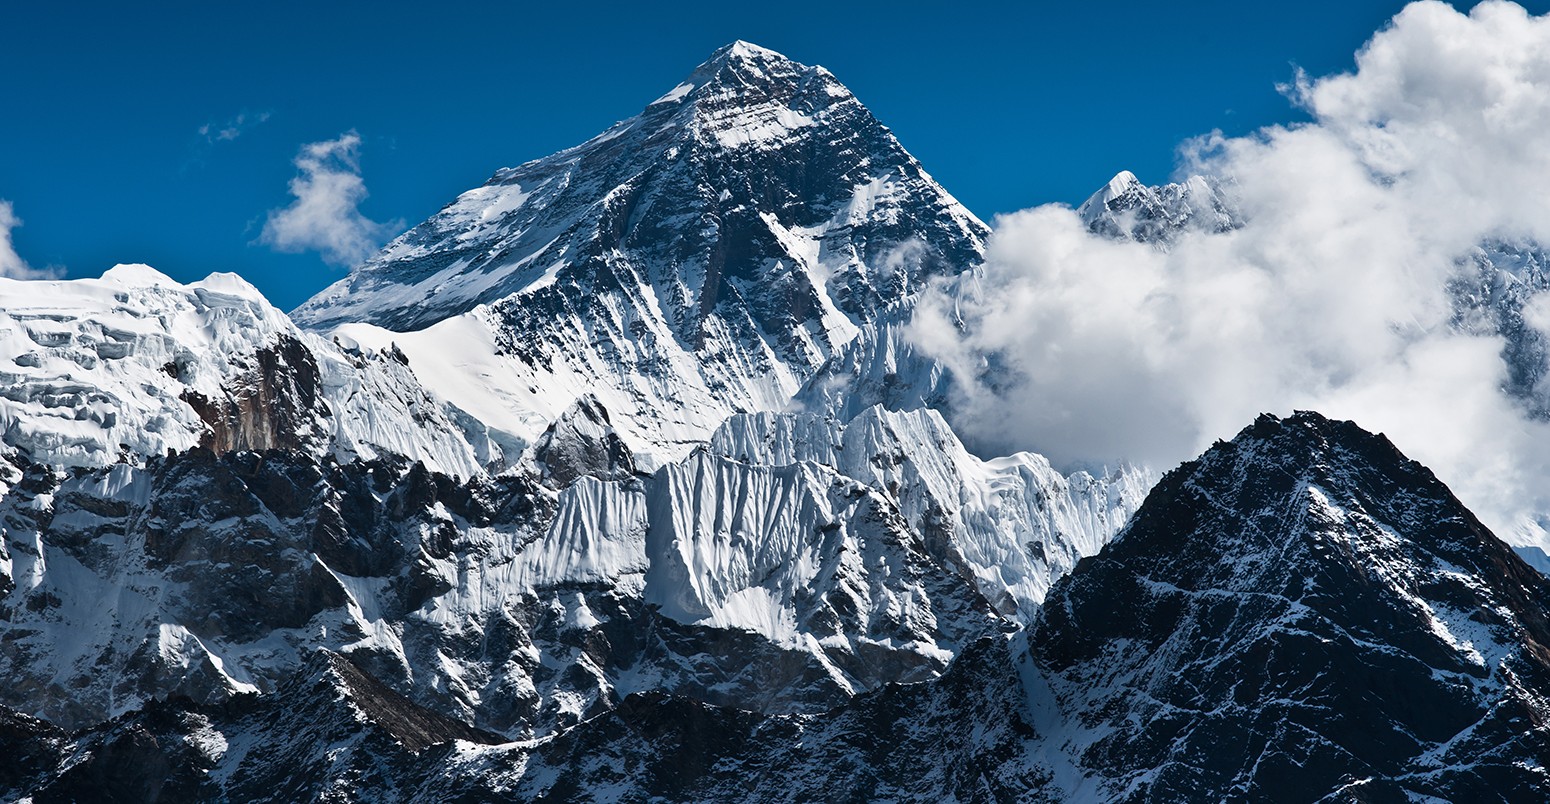 Can You Go 20/20 on This General Knowledge Quiz Where All the Answers Are Numbers? Mount Everest